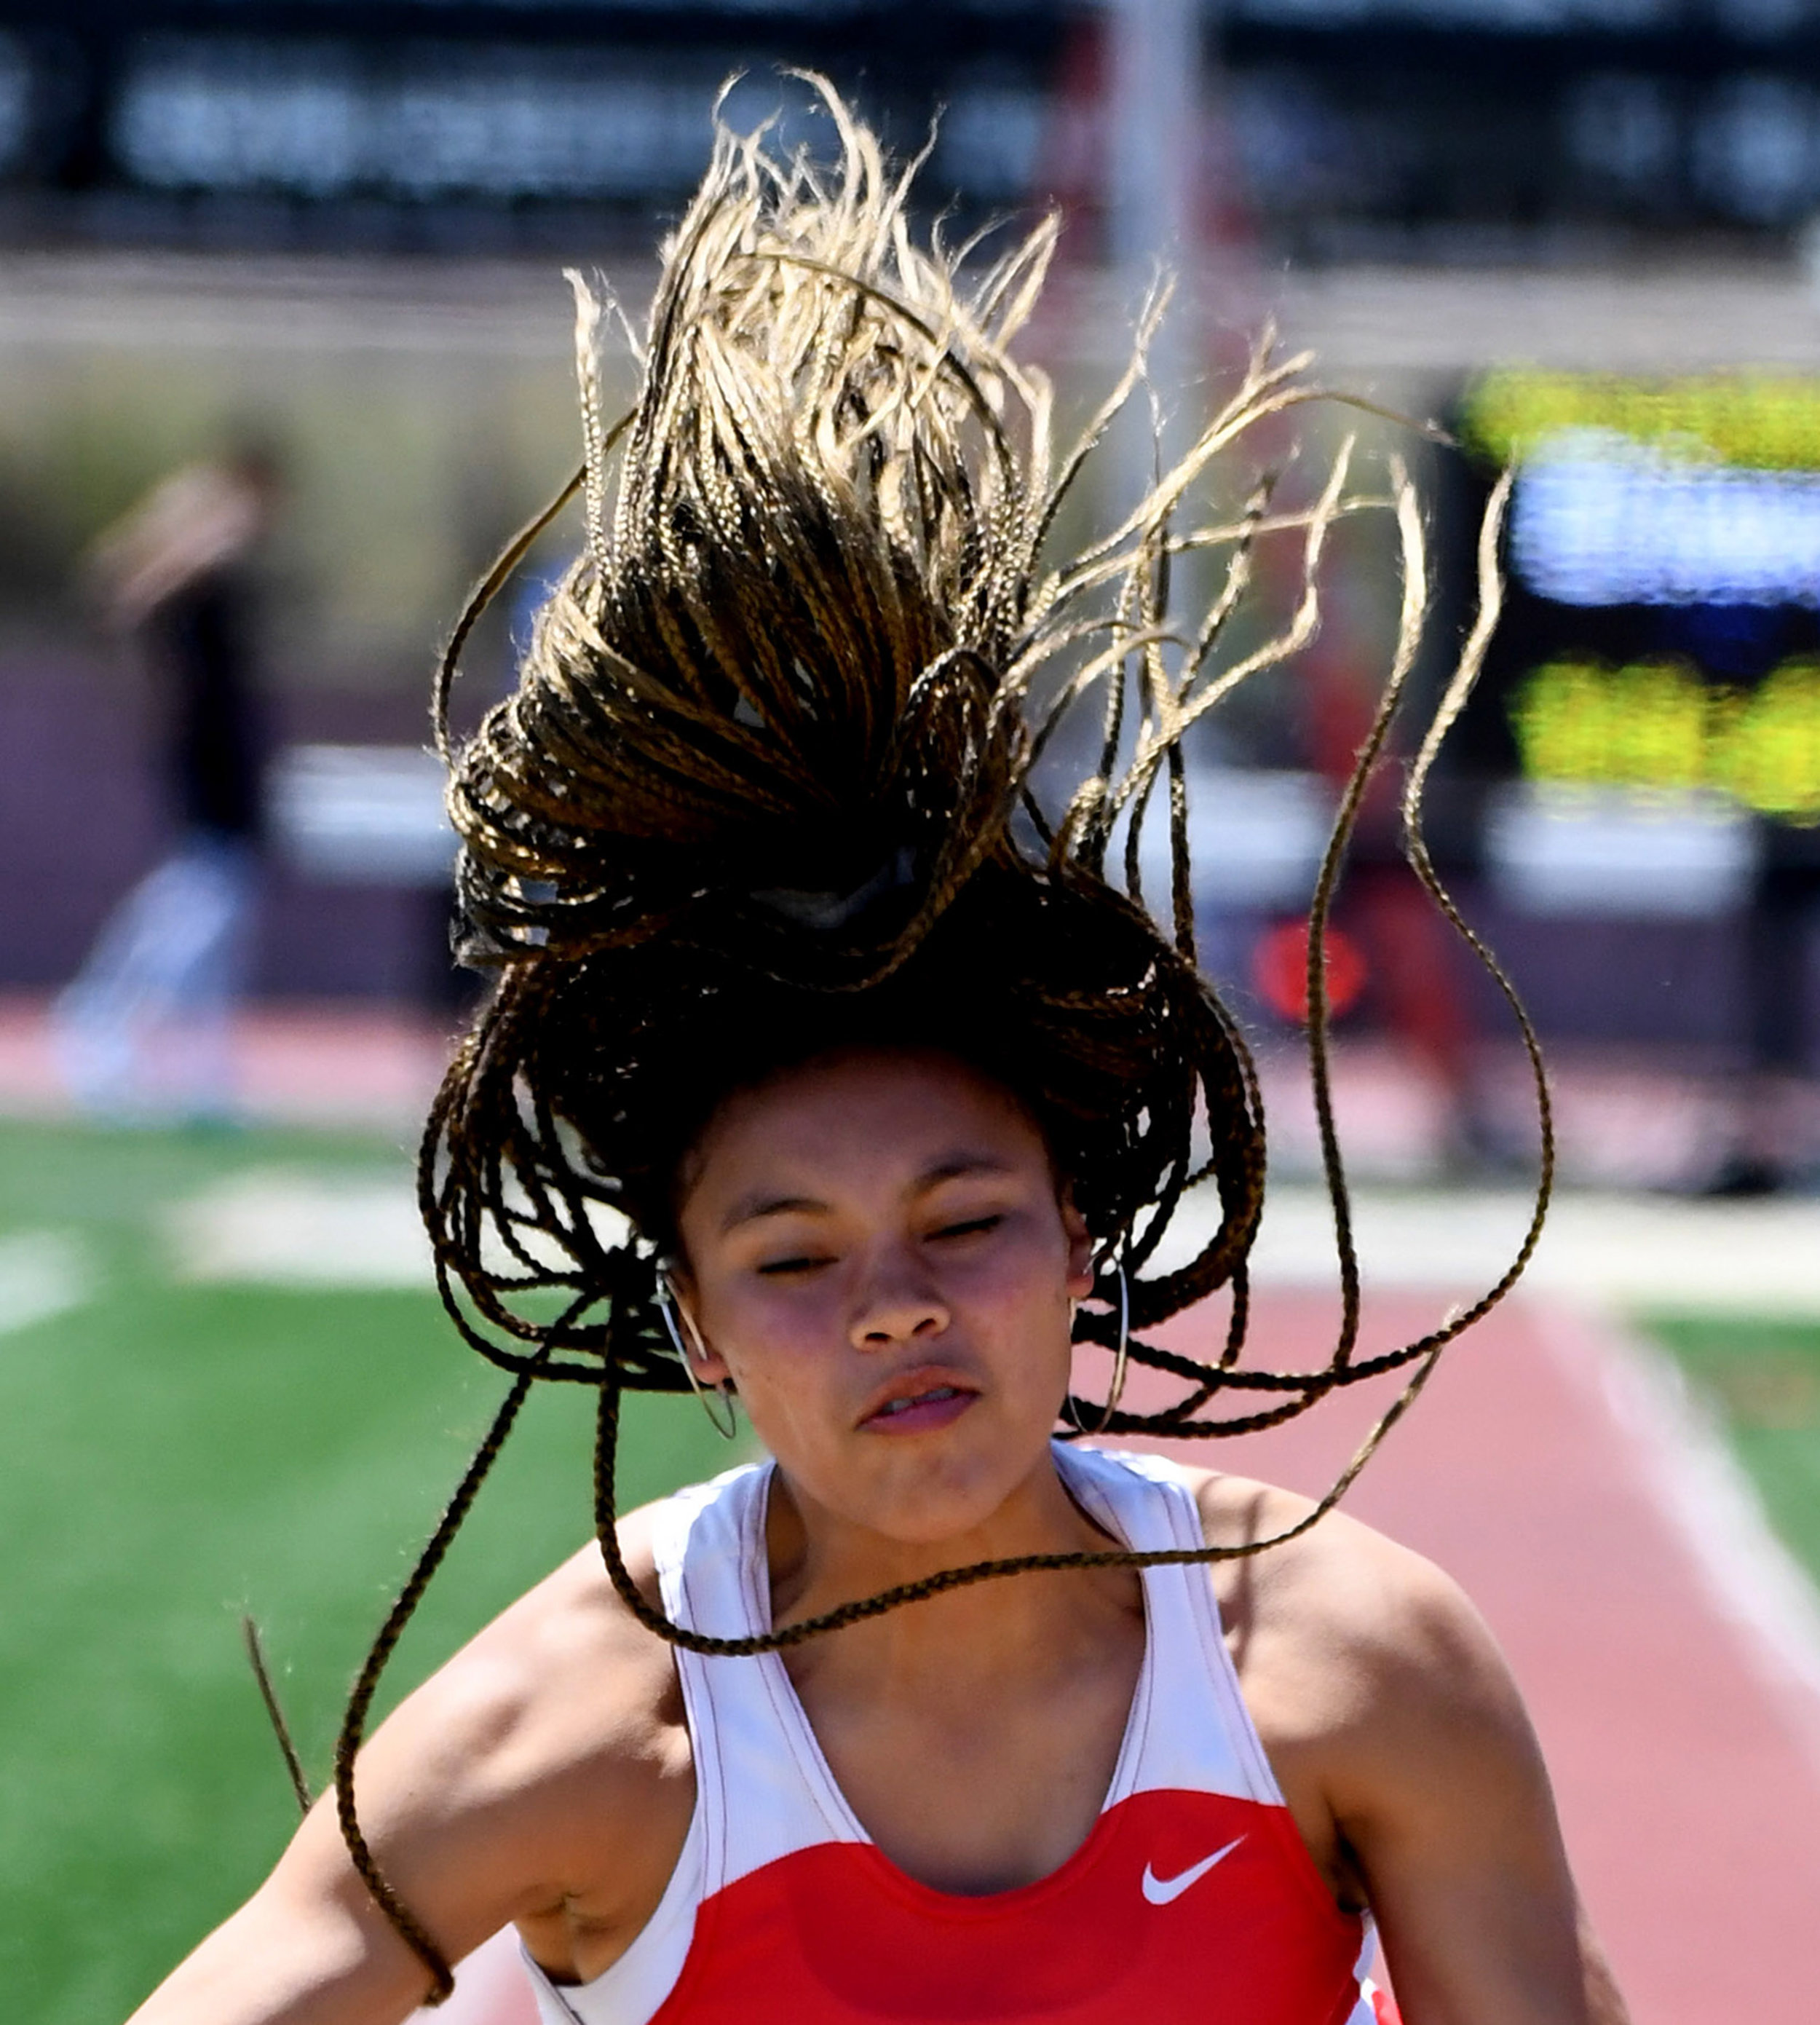  Mater Dei's Jade McDonald competes in the long jump during the CIF-SS Track and Field Masters meet at El Camino College in Torrance, Calif., on Saturday, May 26, 2018.  